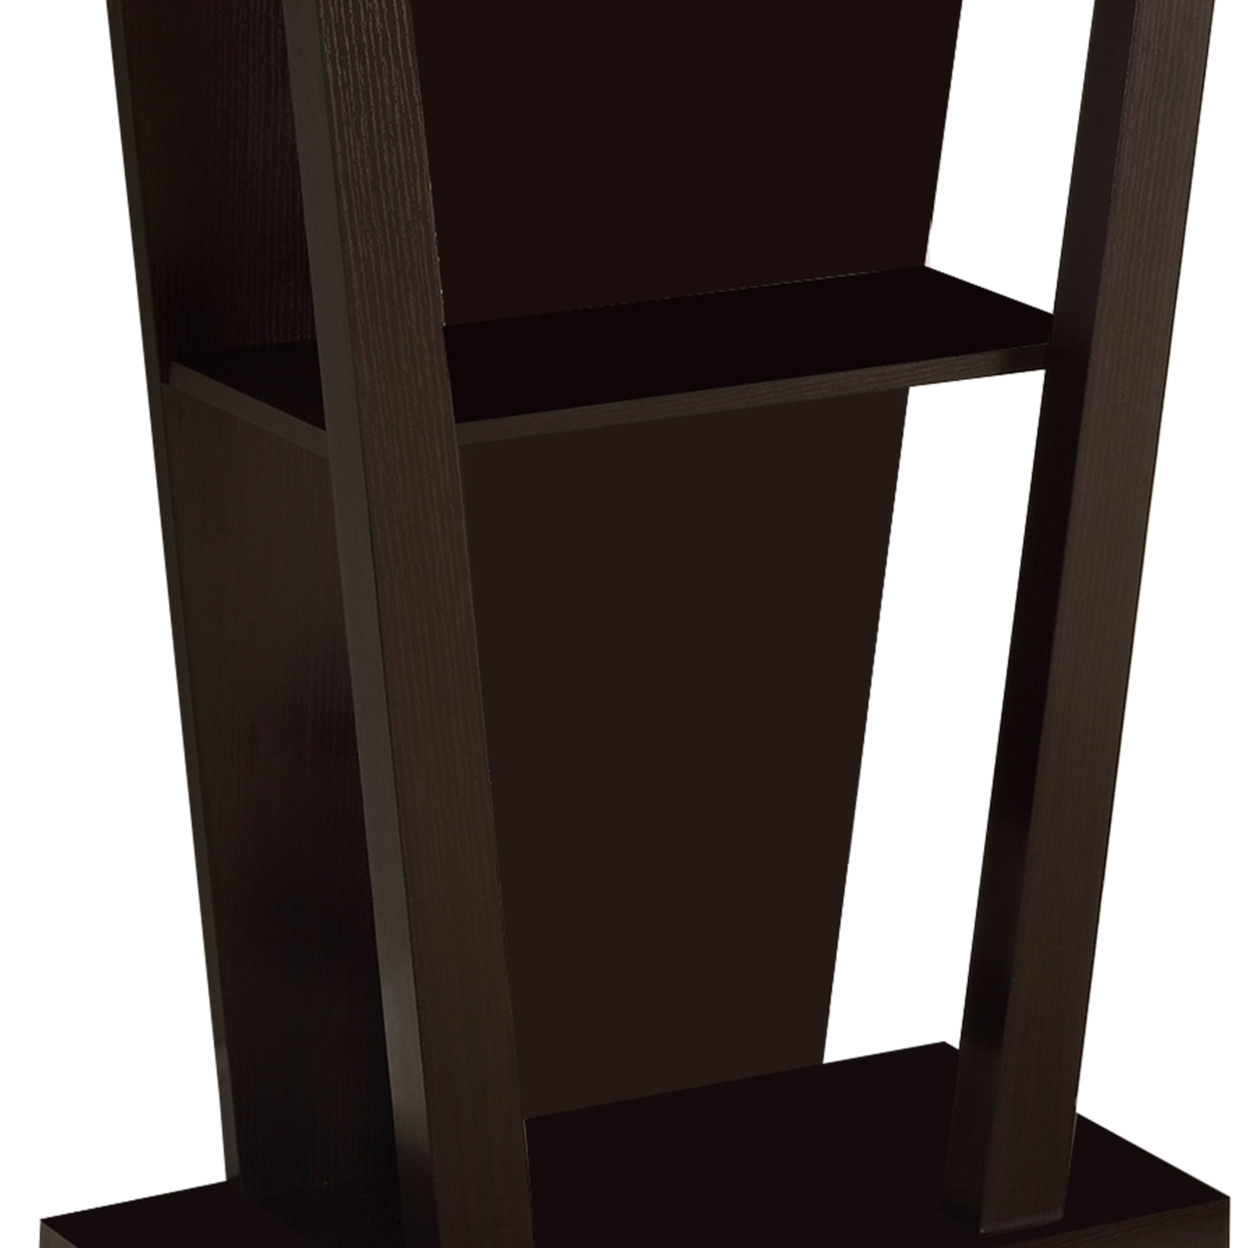 Angled Wooden Console Table With Storage Space, Brown- Saltoro Sherpi